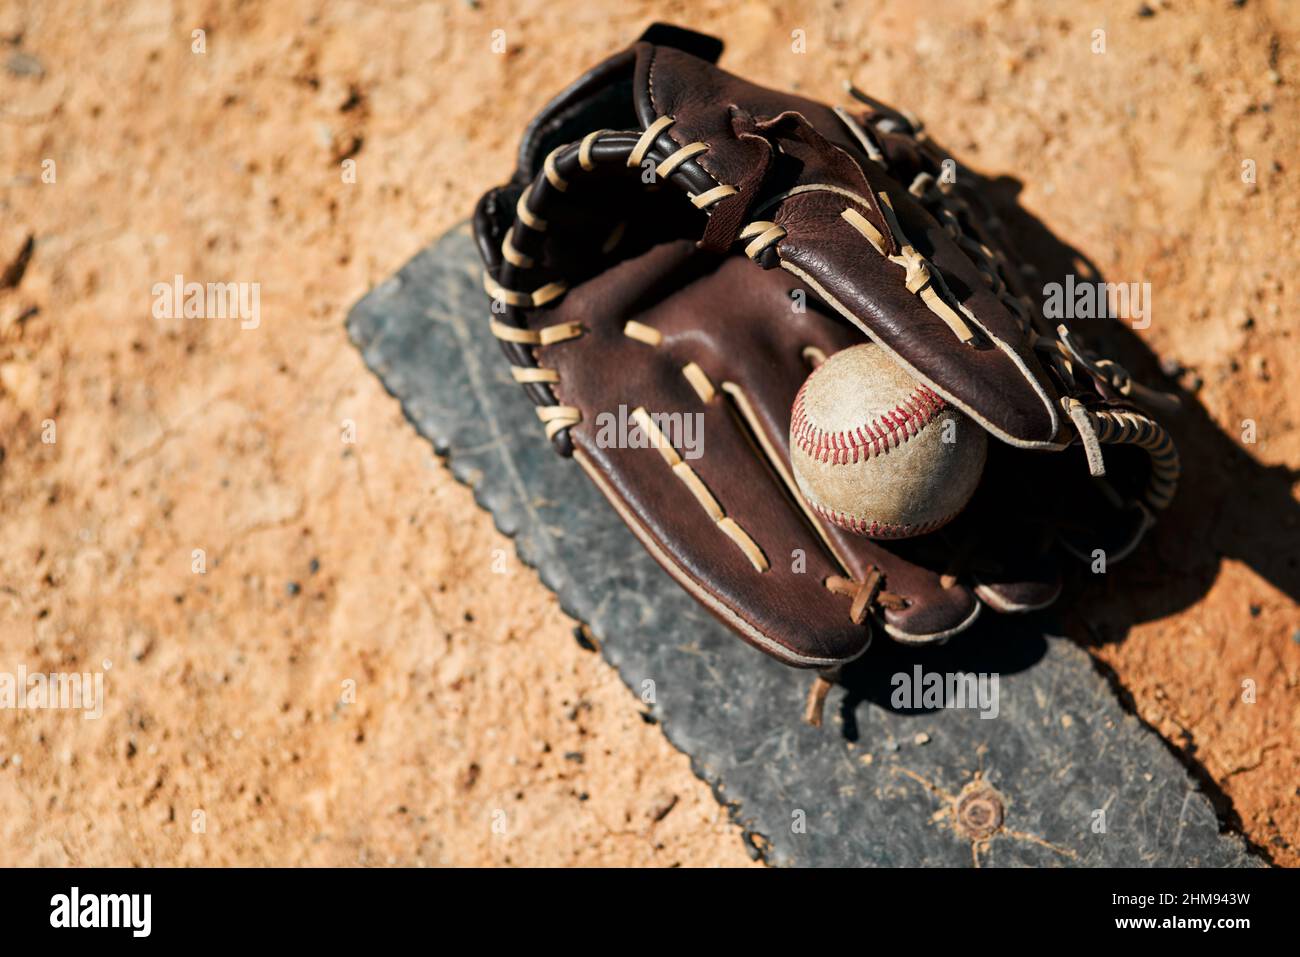 Its baseball season. Shot of a baseball mitt and ball lying on the pitch during the day. Stock Photo